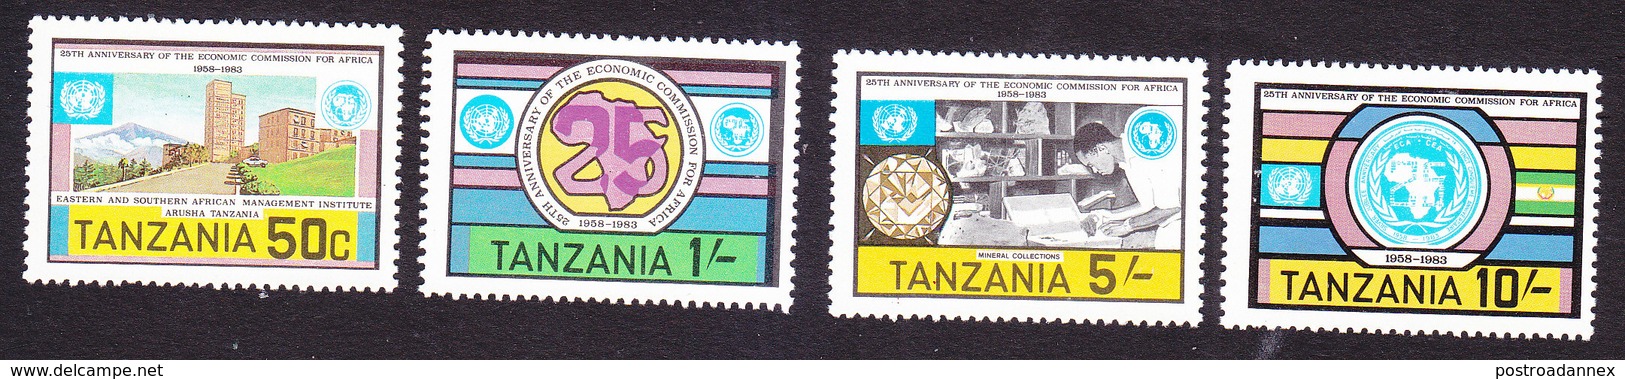 Tanzania, Scott #225-228, Mint Hinged, 25th Ann Of Economic Commission For Africa, Issued 1983 - Tanzania (1964-...)